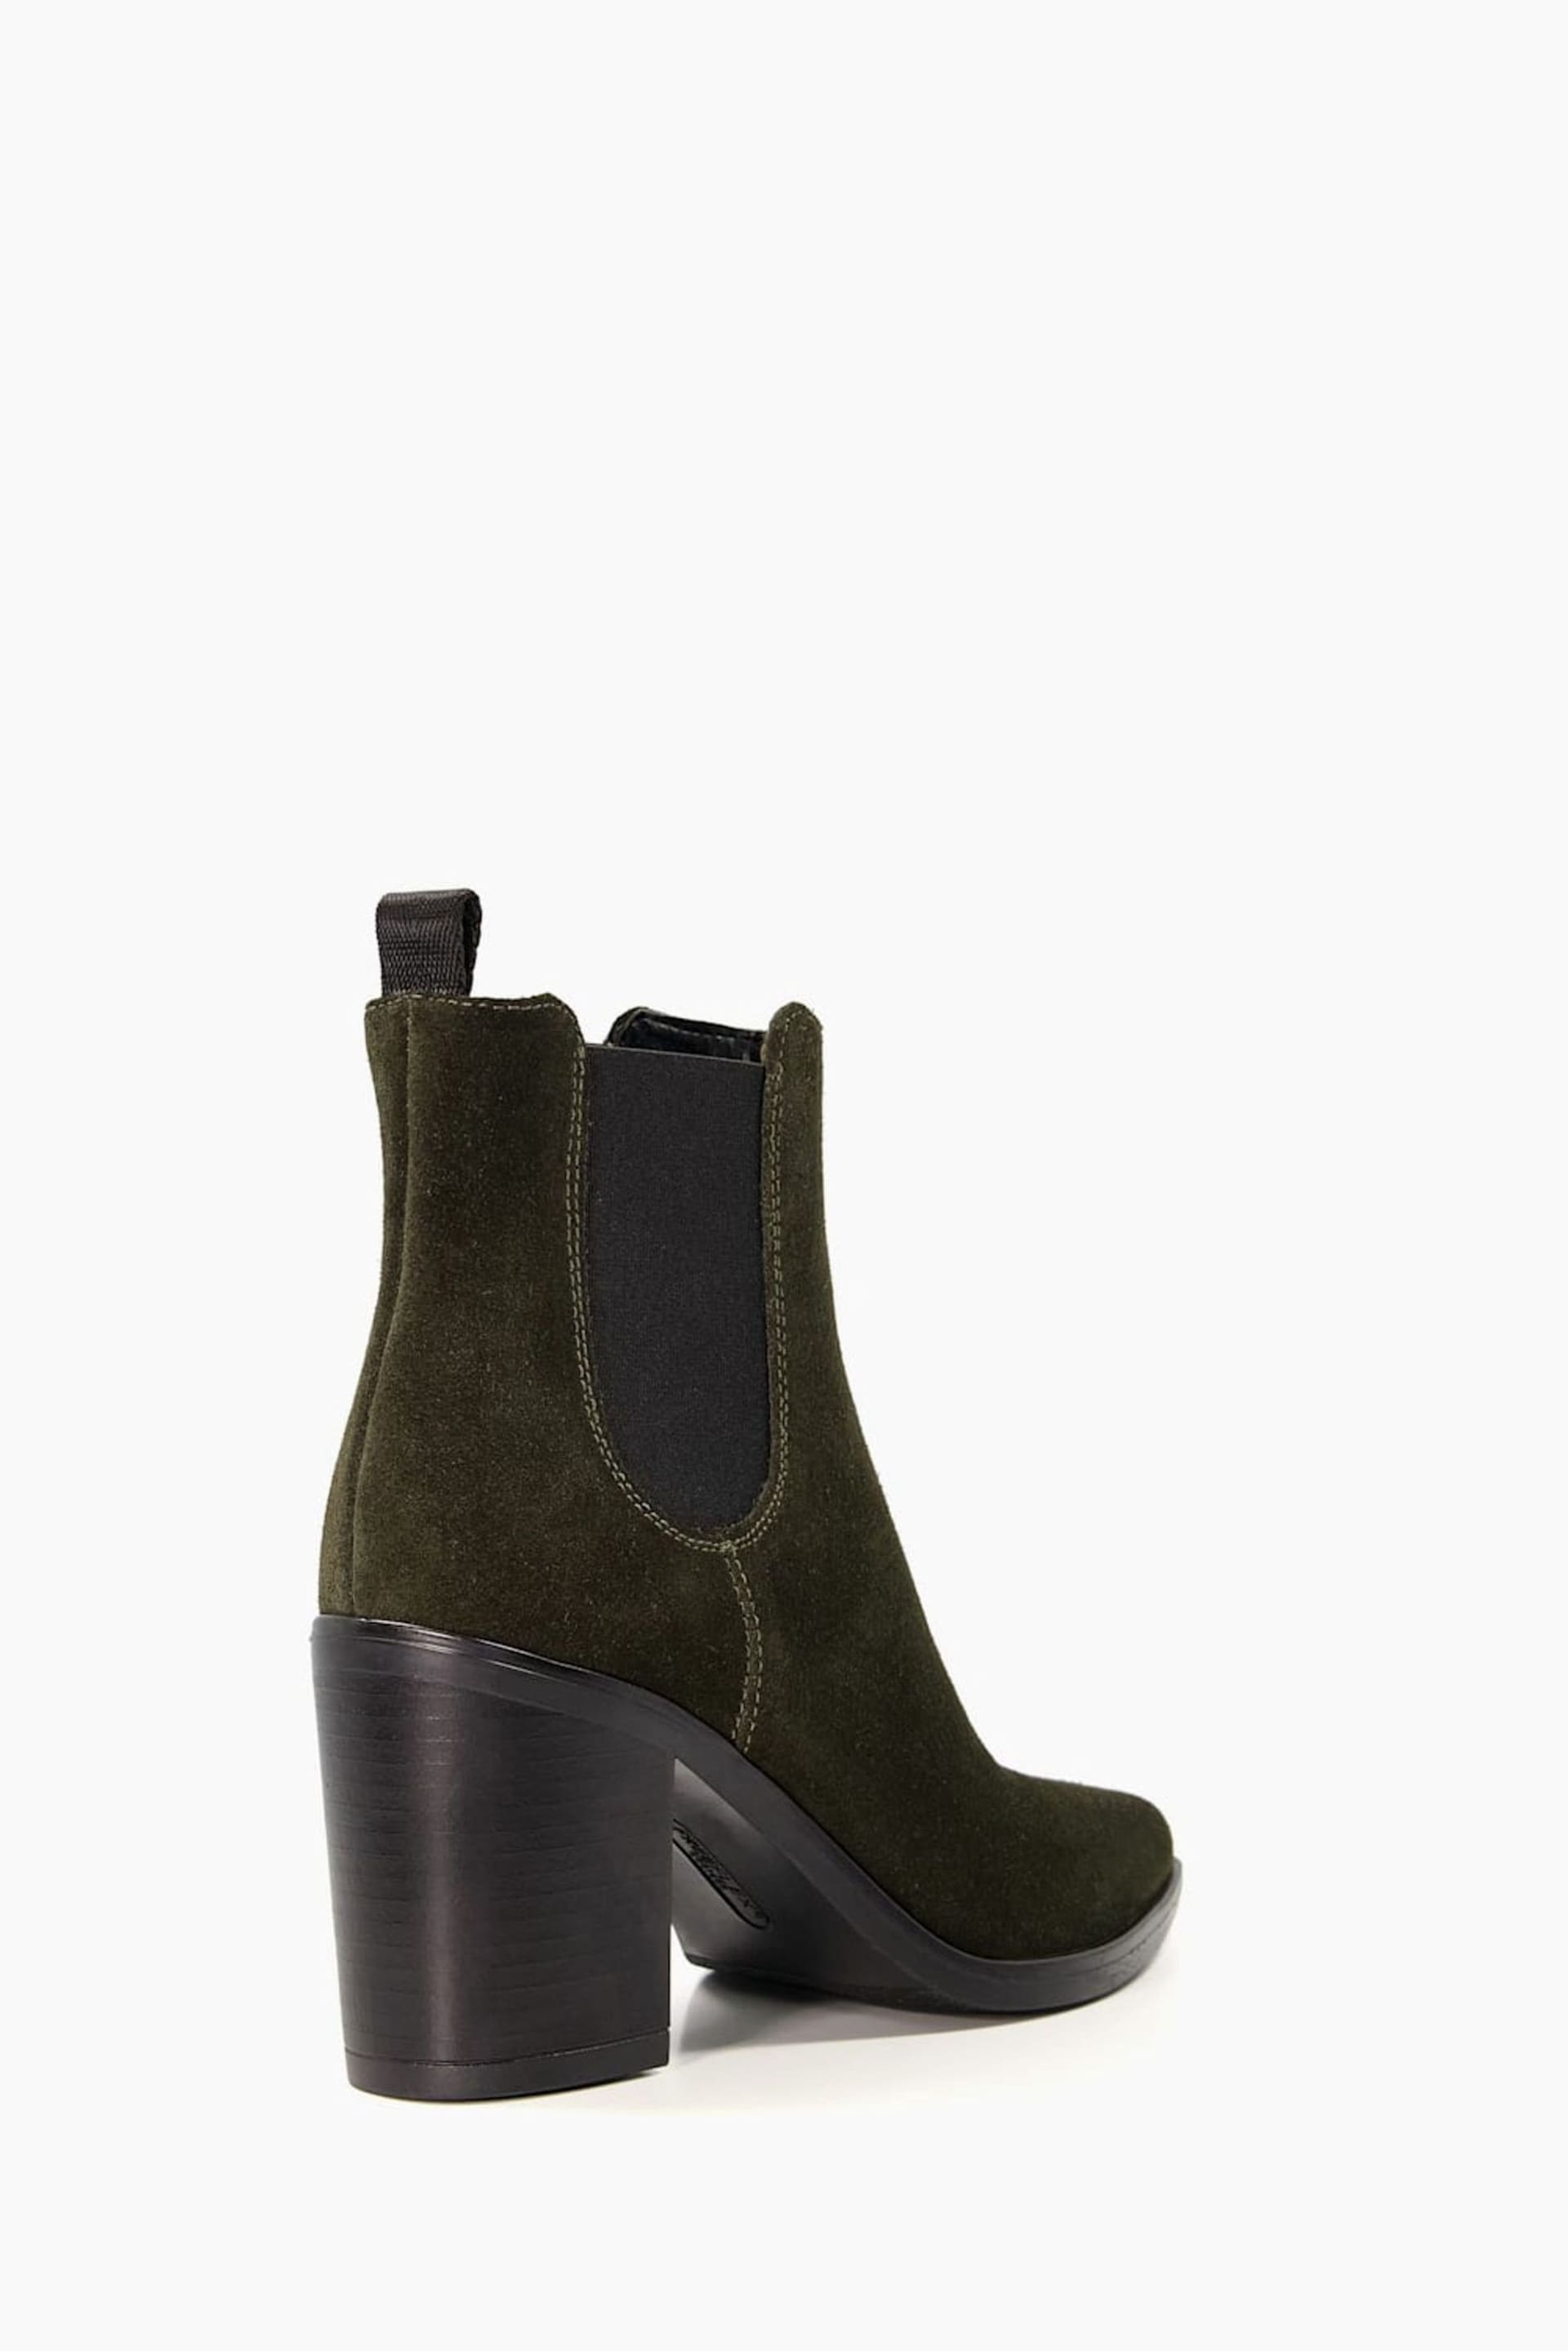 Dune London Green Prea High Western Chelsea Boots - Image 3 of 5